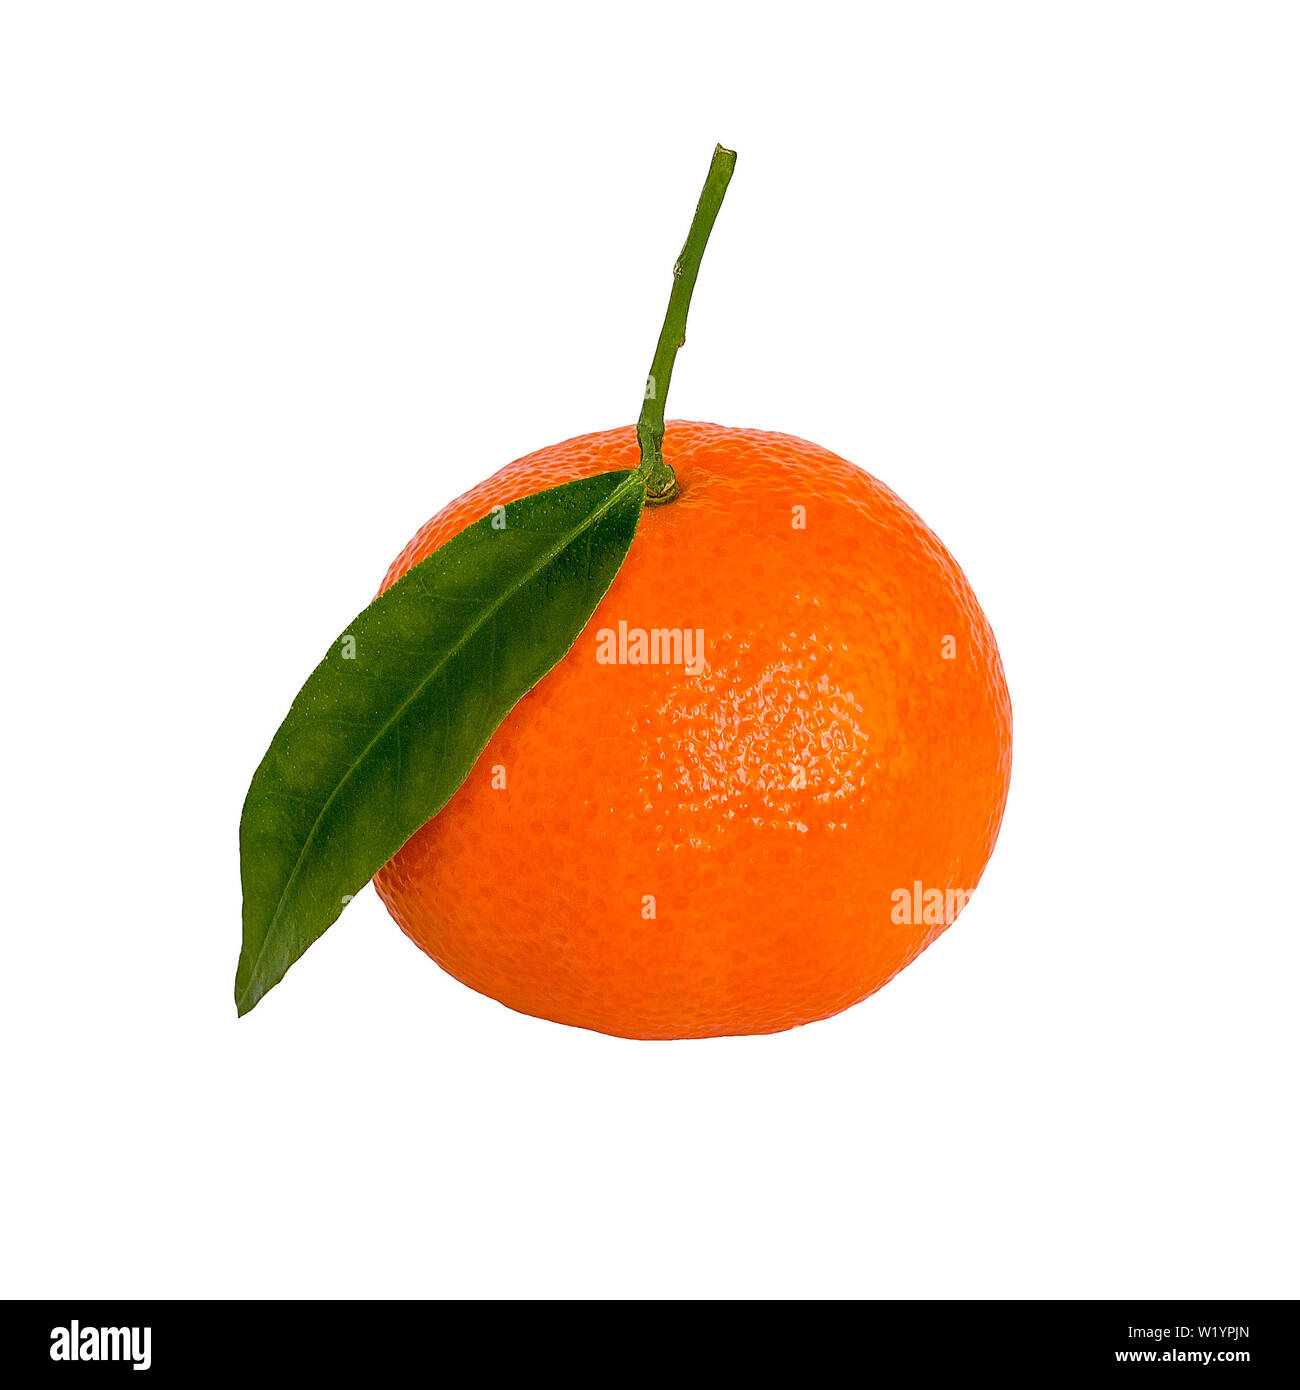 One ripe orange tangerine or mandarin with green leaf isolated on white background. Front view. Stock Photo